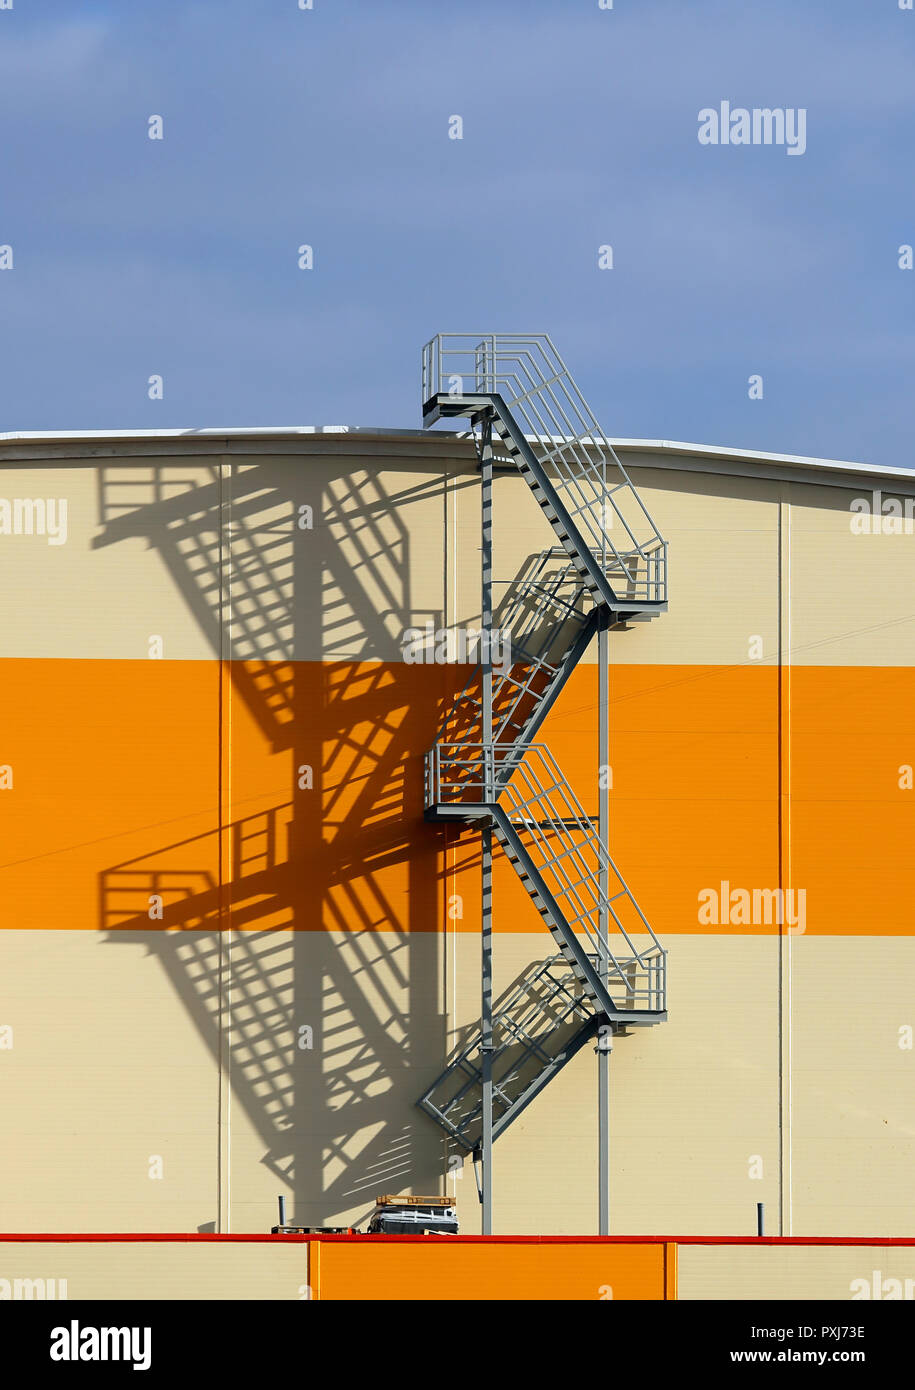 Multi-span metal staircase at the outside of the industrial building Stock Photo